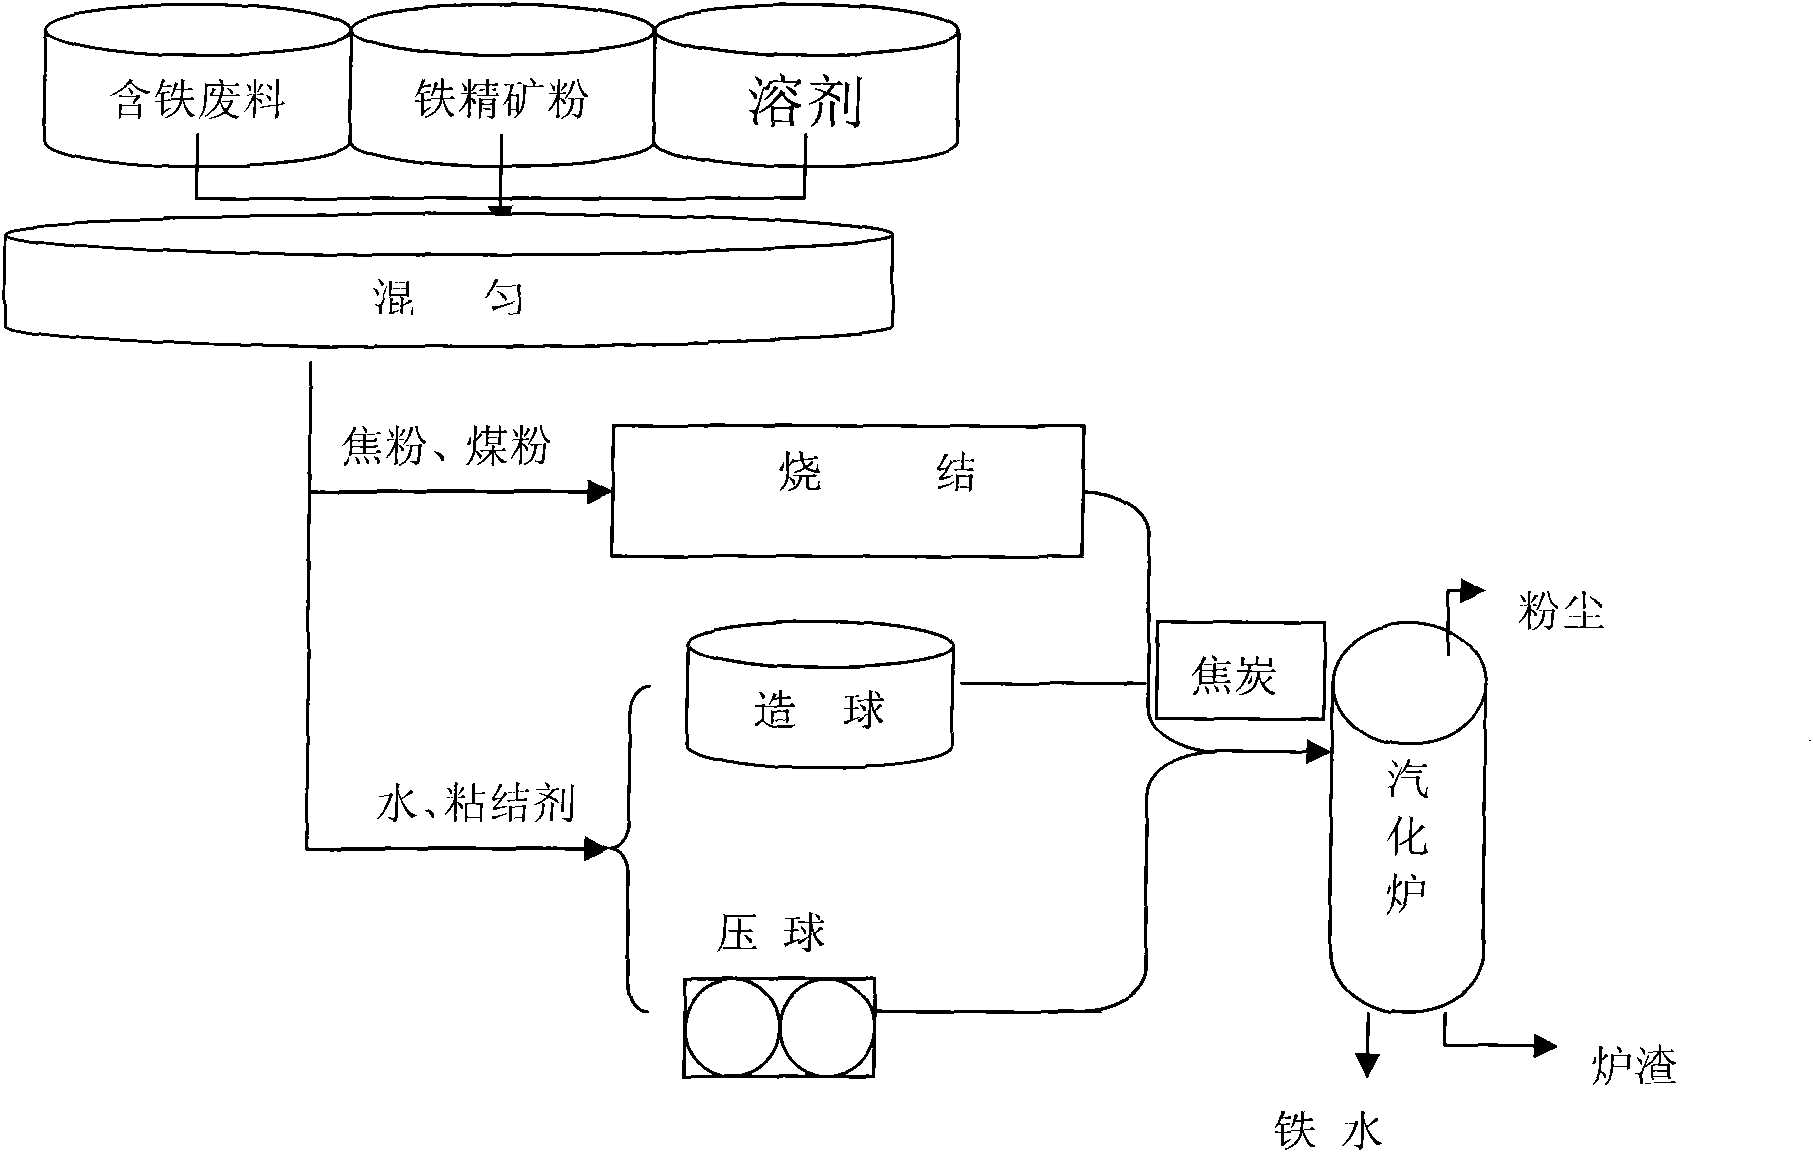 Method for treating iron-containing dusts in steel plant by using melting gasification furnace